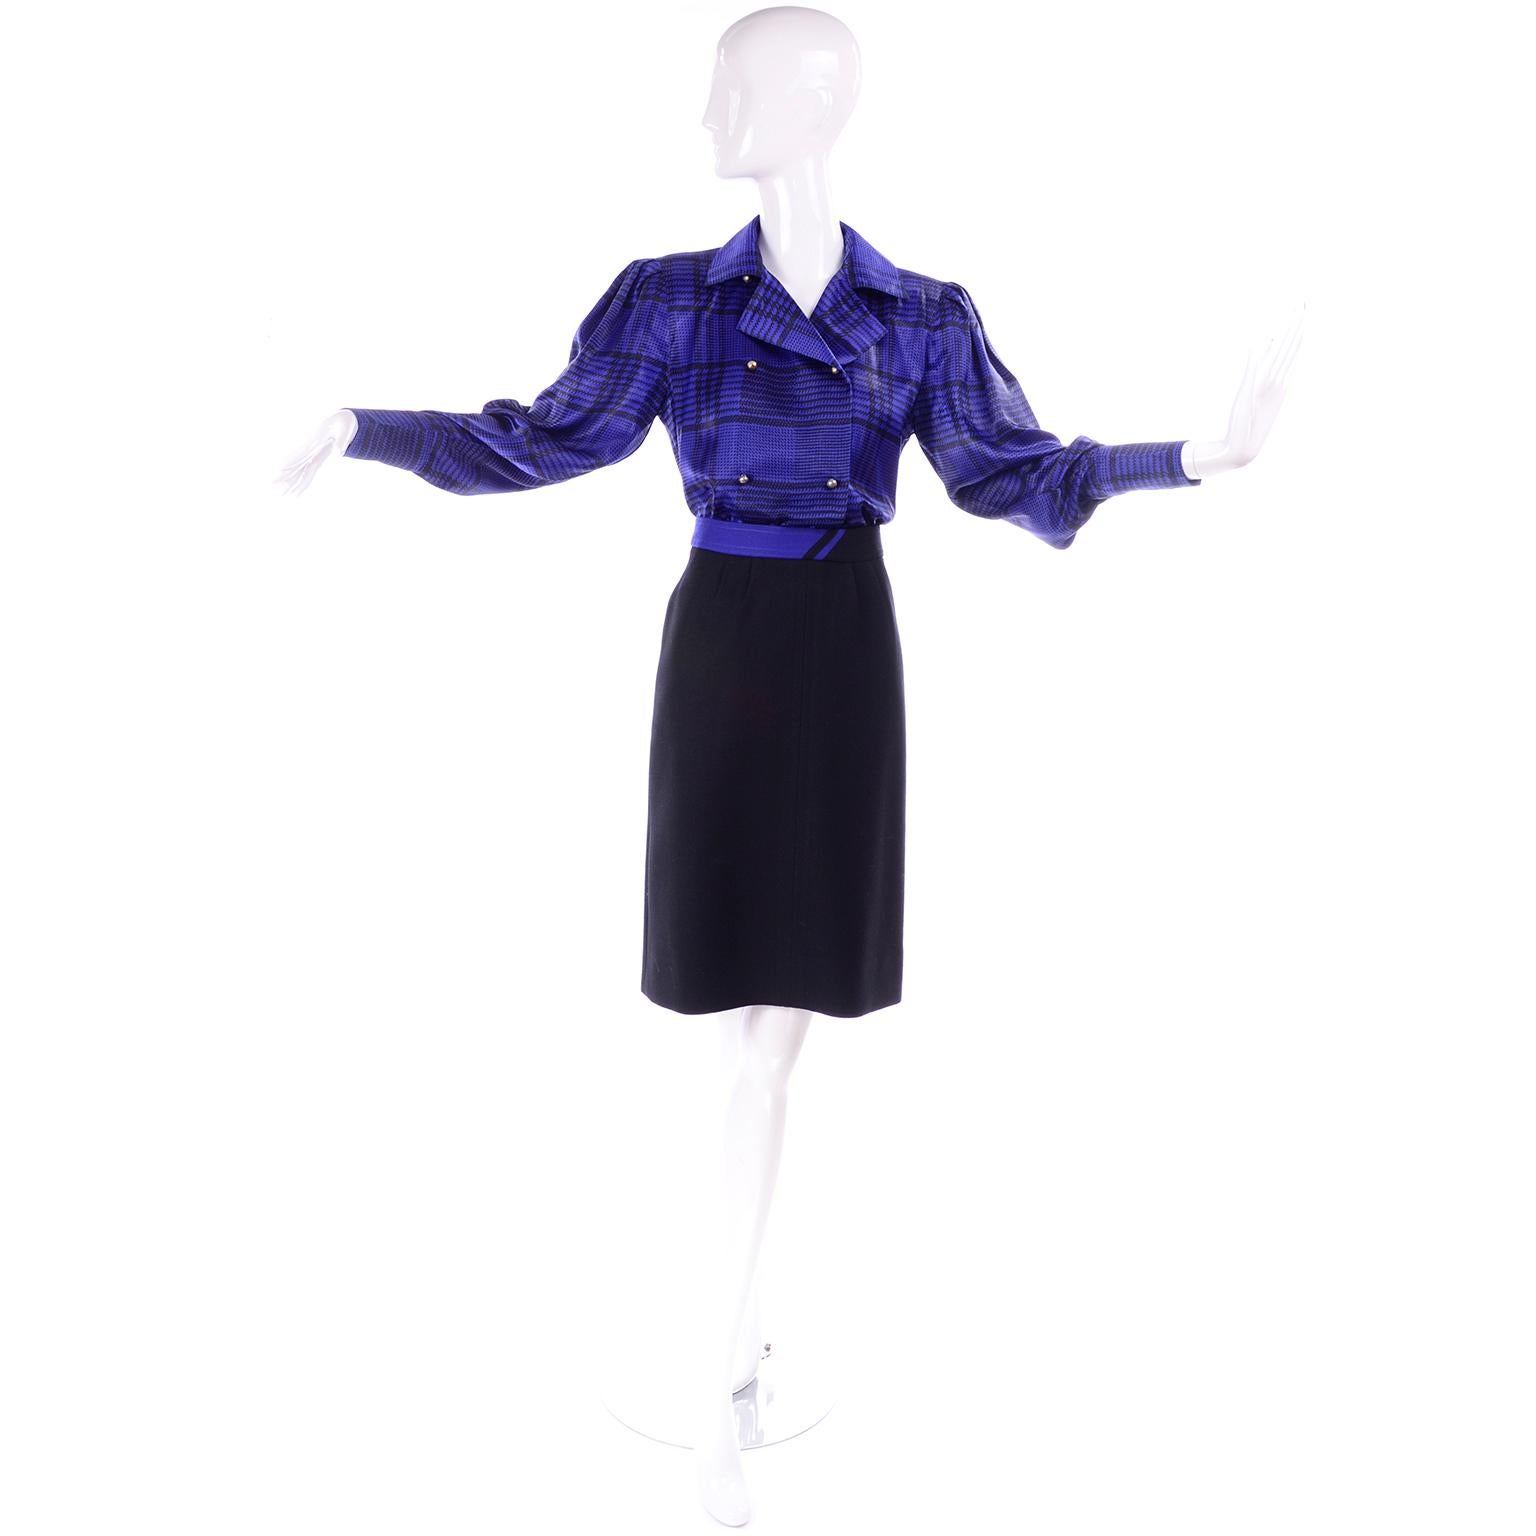 This is a 3 piece ensemble that includes a blue and black plaid silky blouse with an adjustable neck tie and a black wool skirt with blue details on the waistband that match the skirt. The skirt is fully lined and has small pleats from the